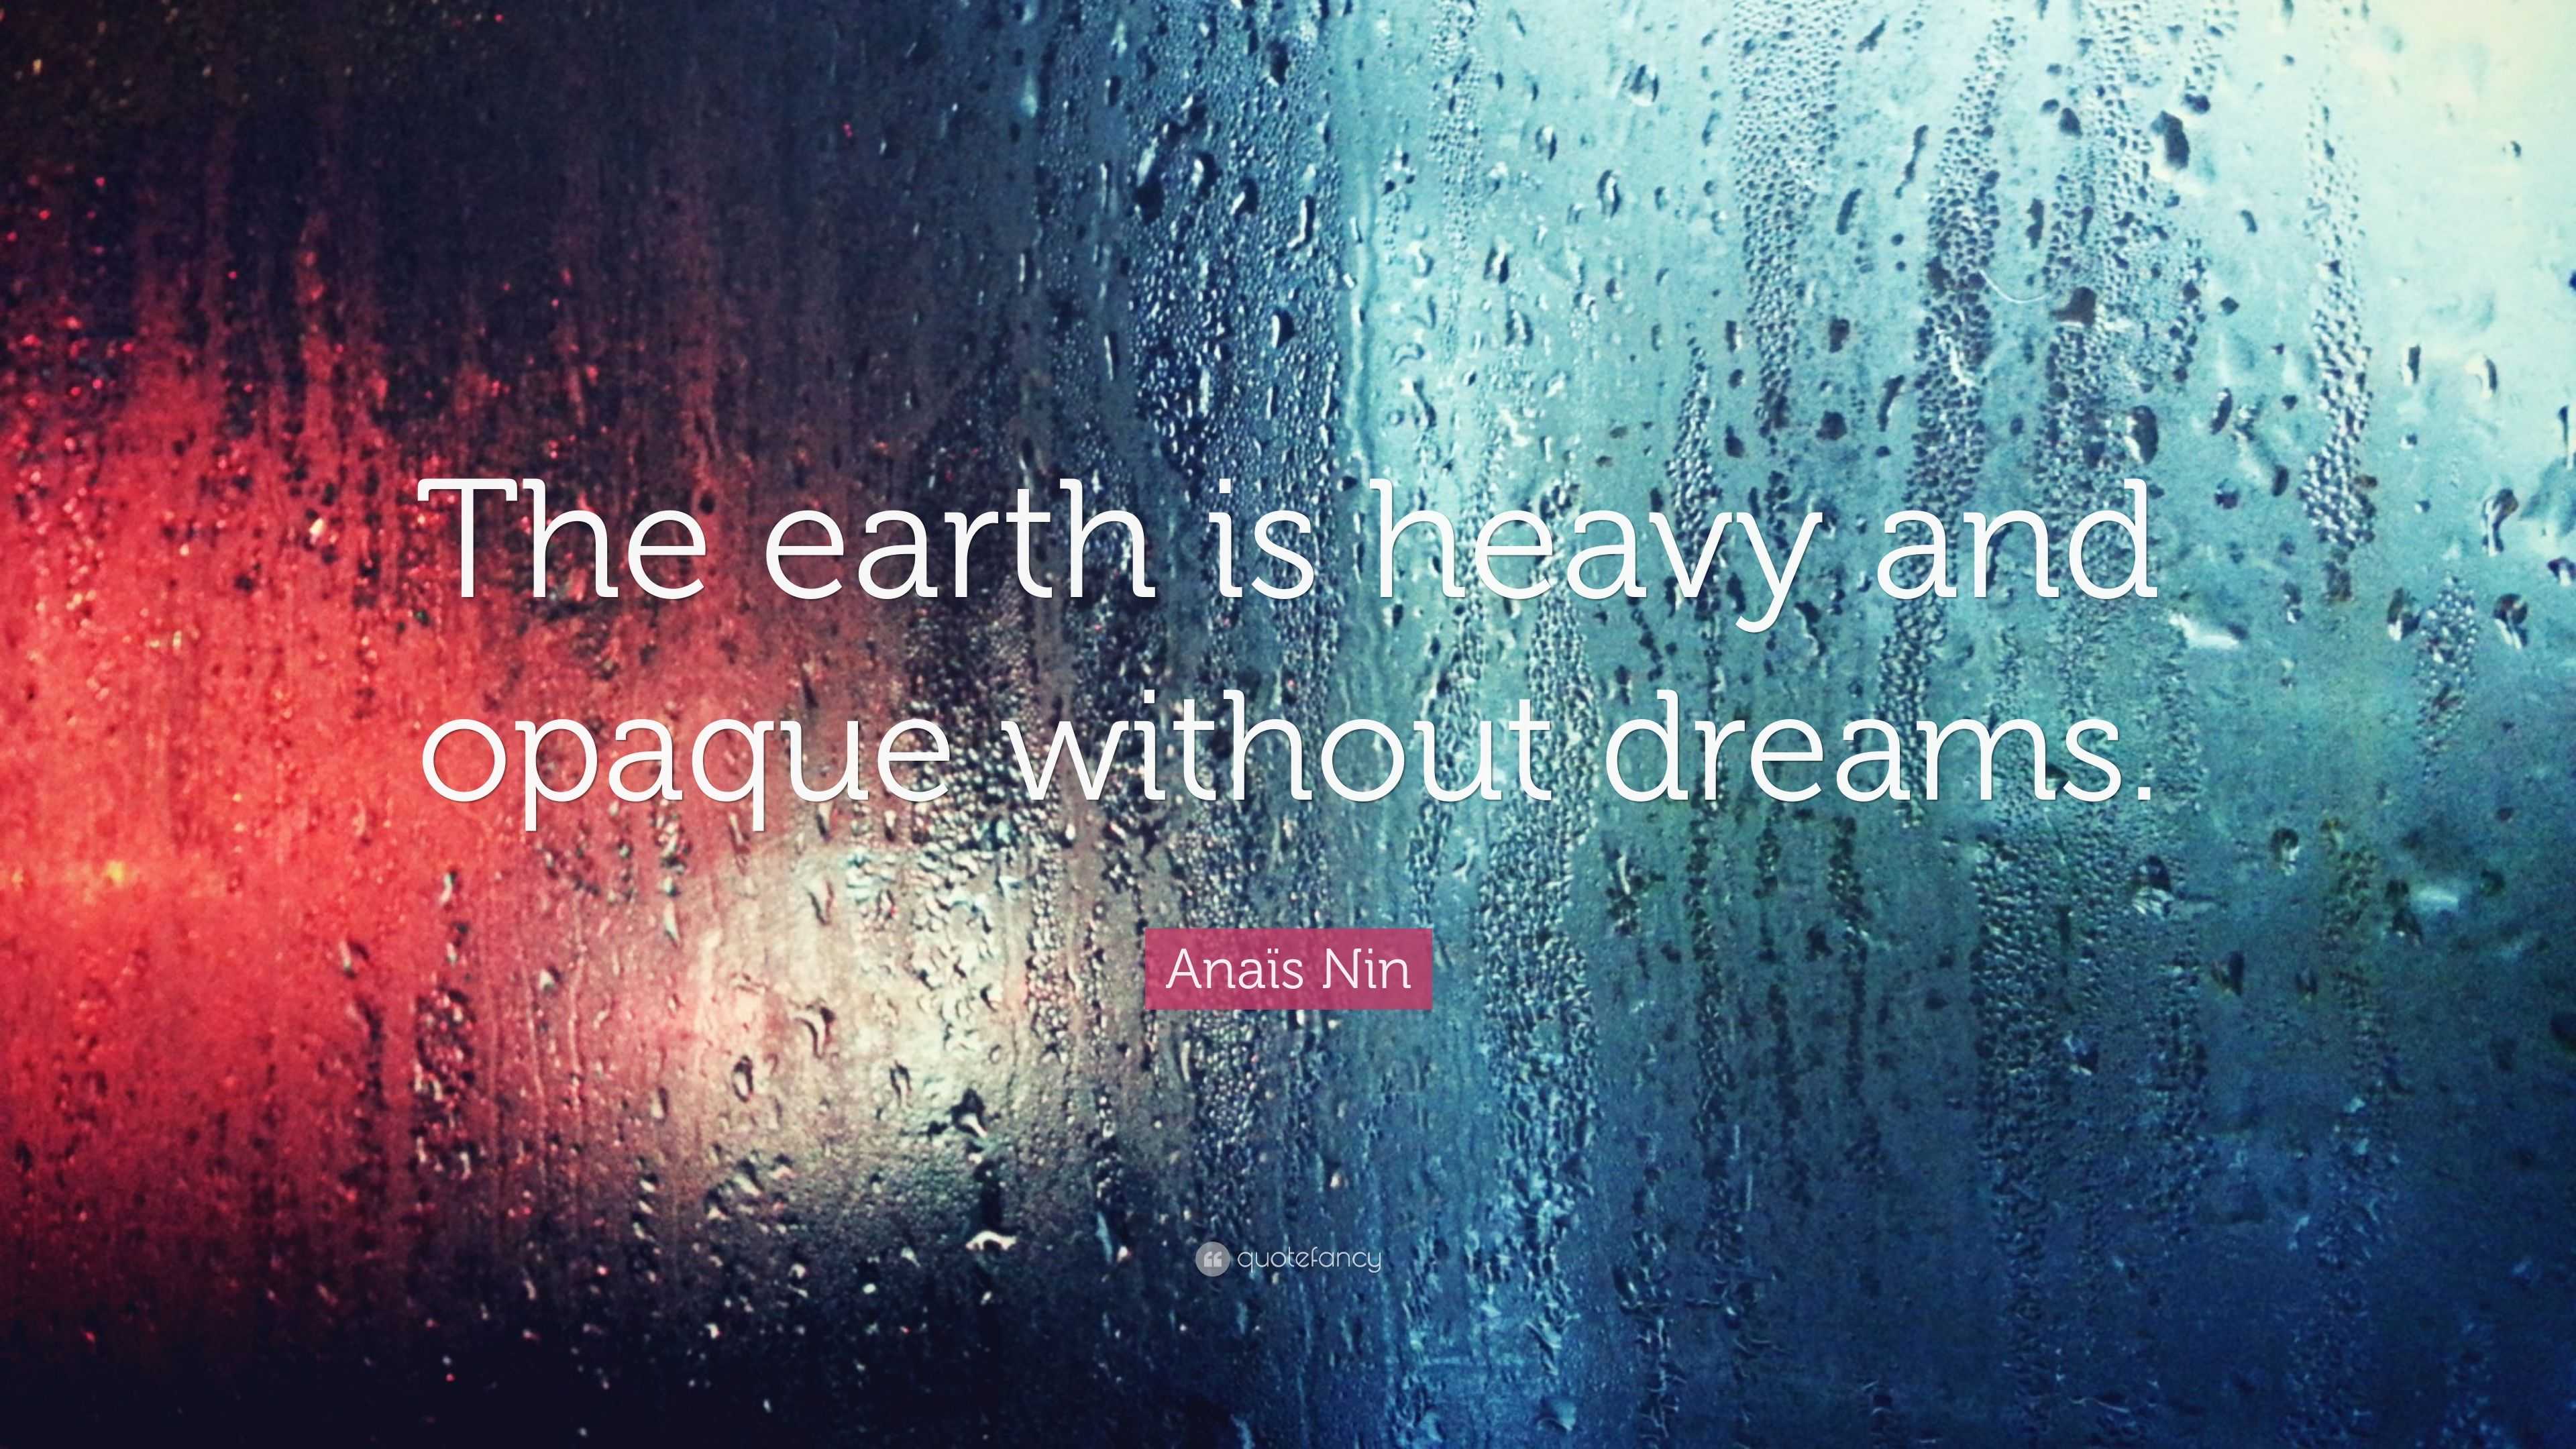 Anaïs Nin Quote: “The earth is heavy